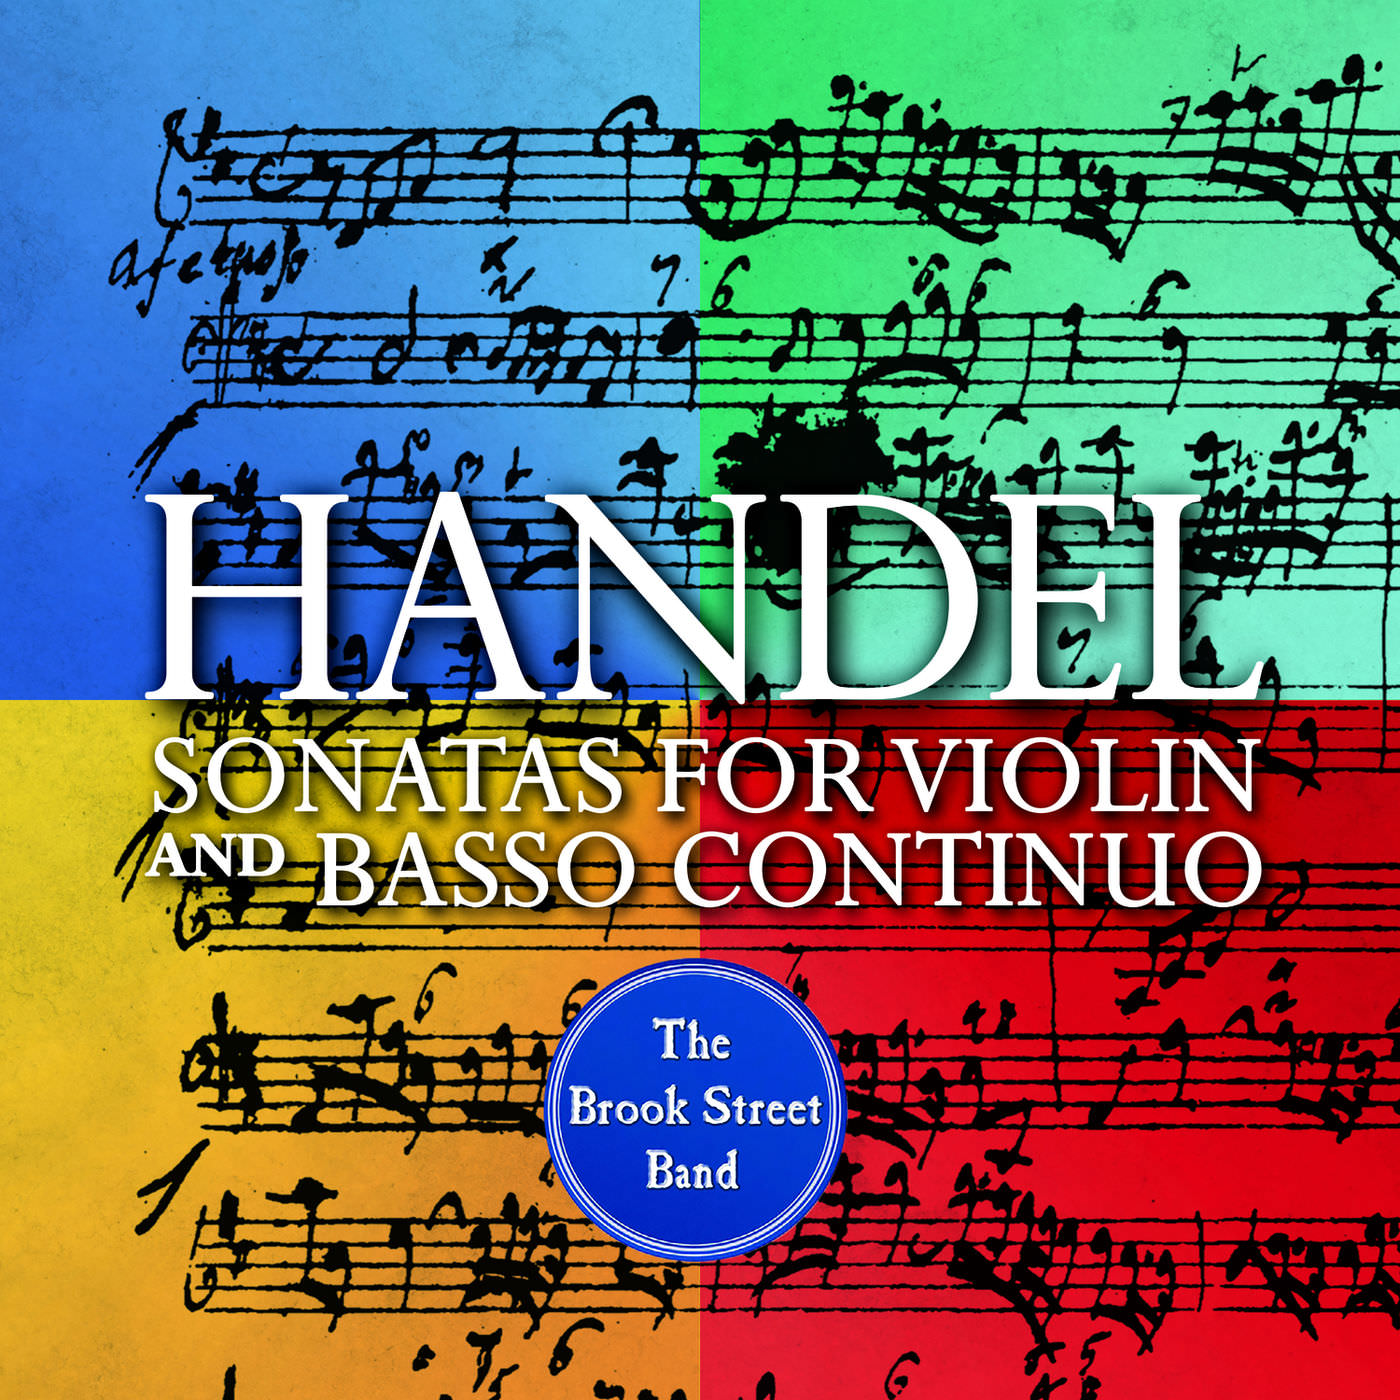 The Brook Street Band - Handel: Sonatas for Violin and Basso Continuo (2018) [FLAC 24bit/96kHz]